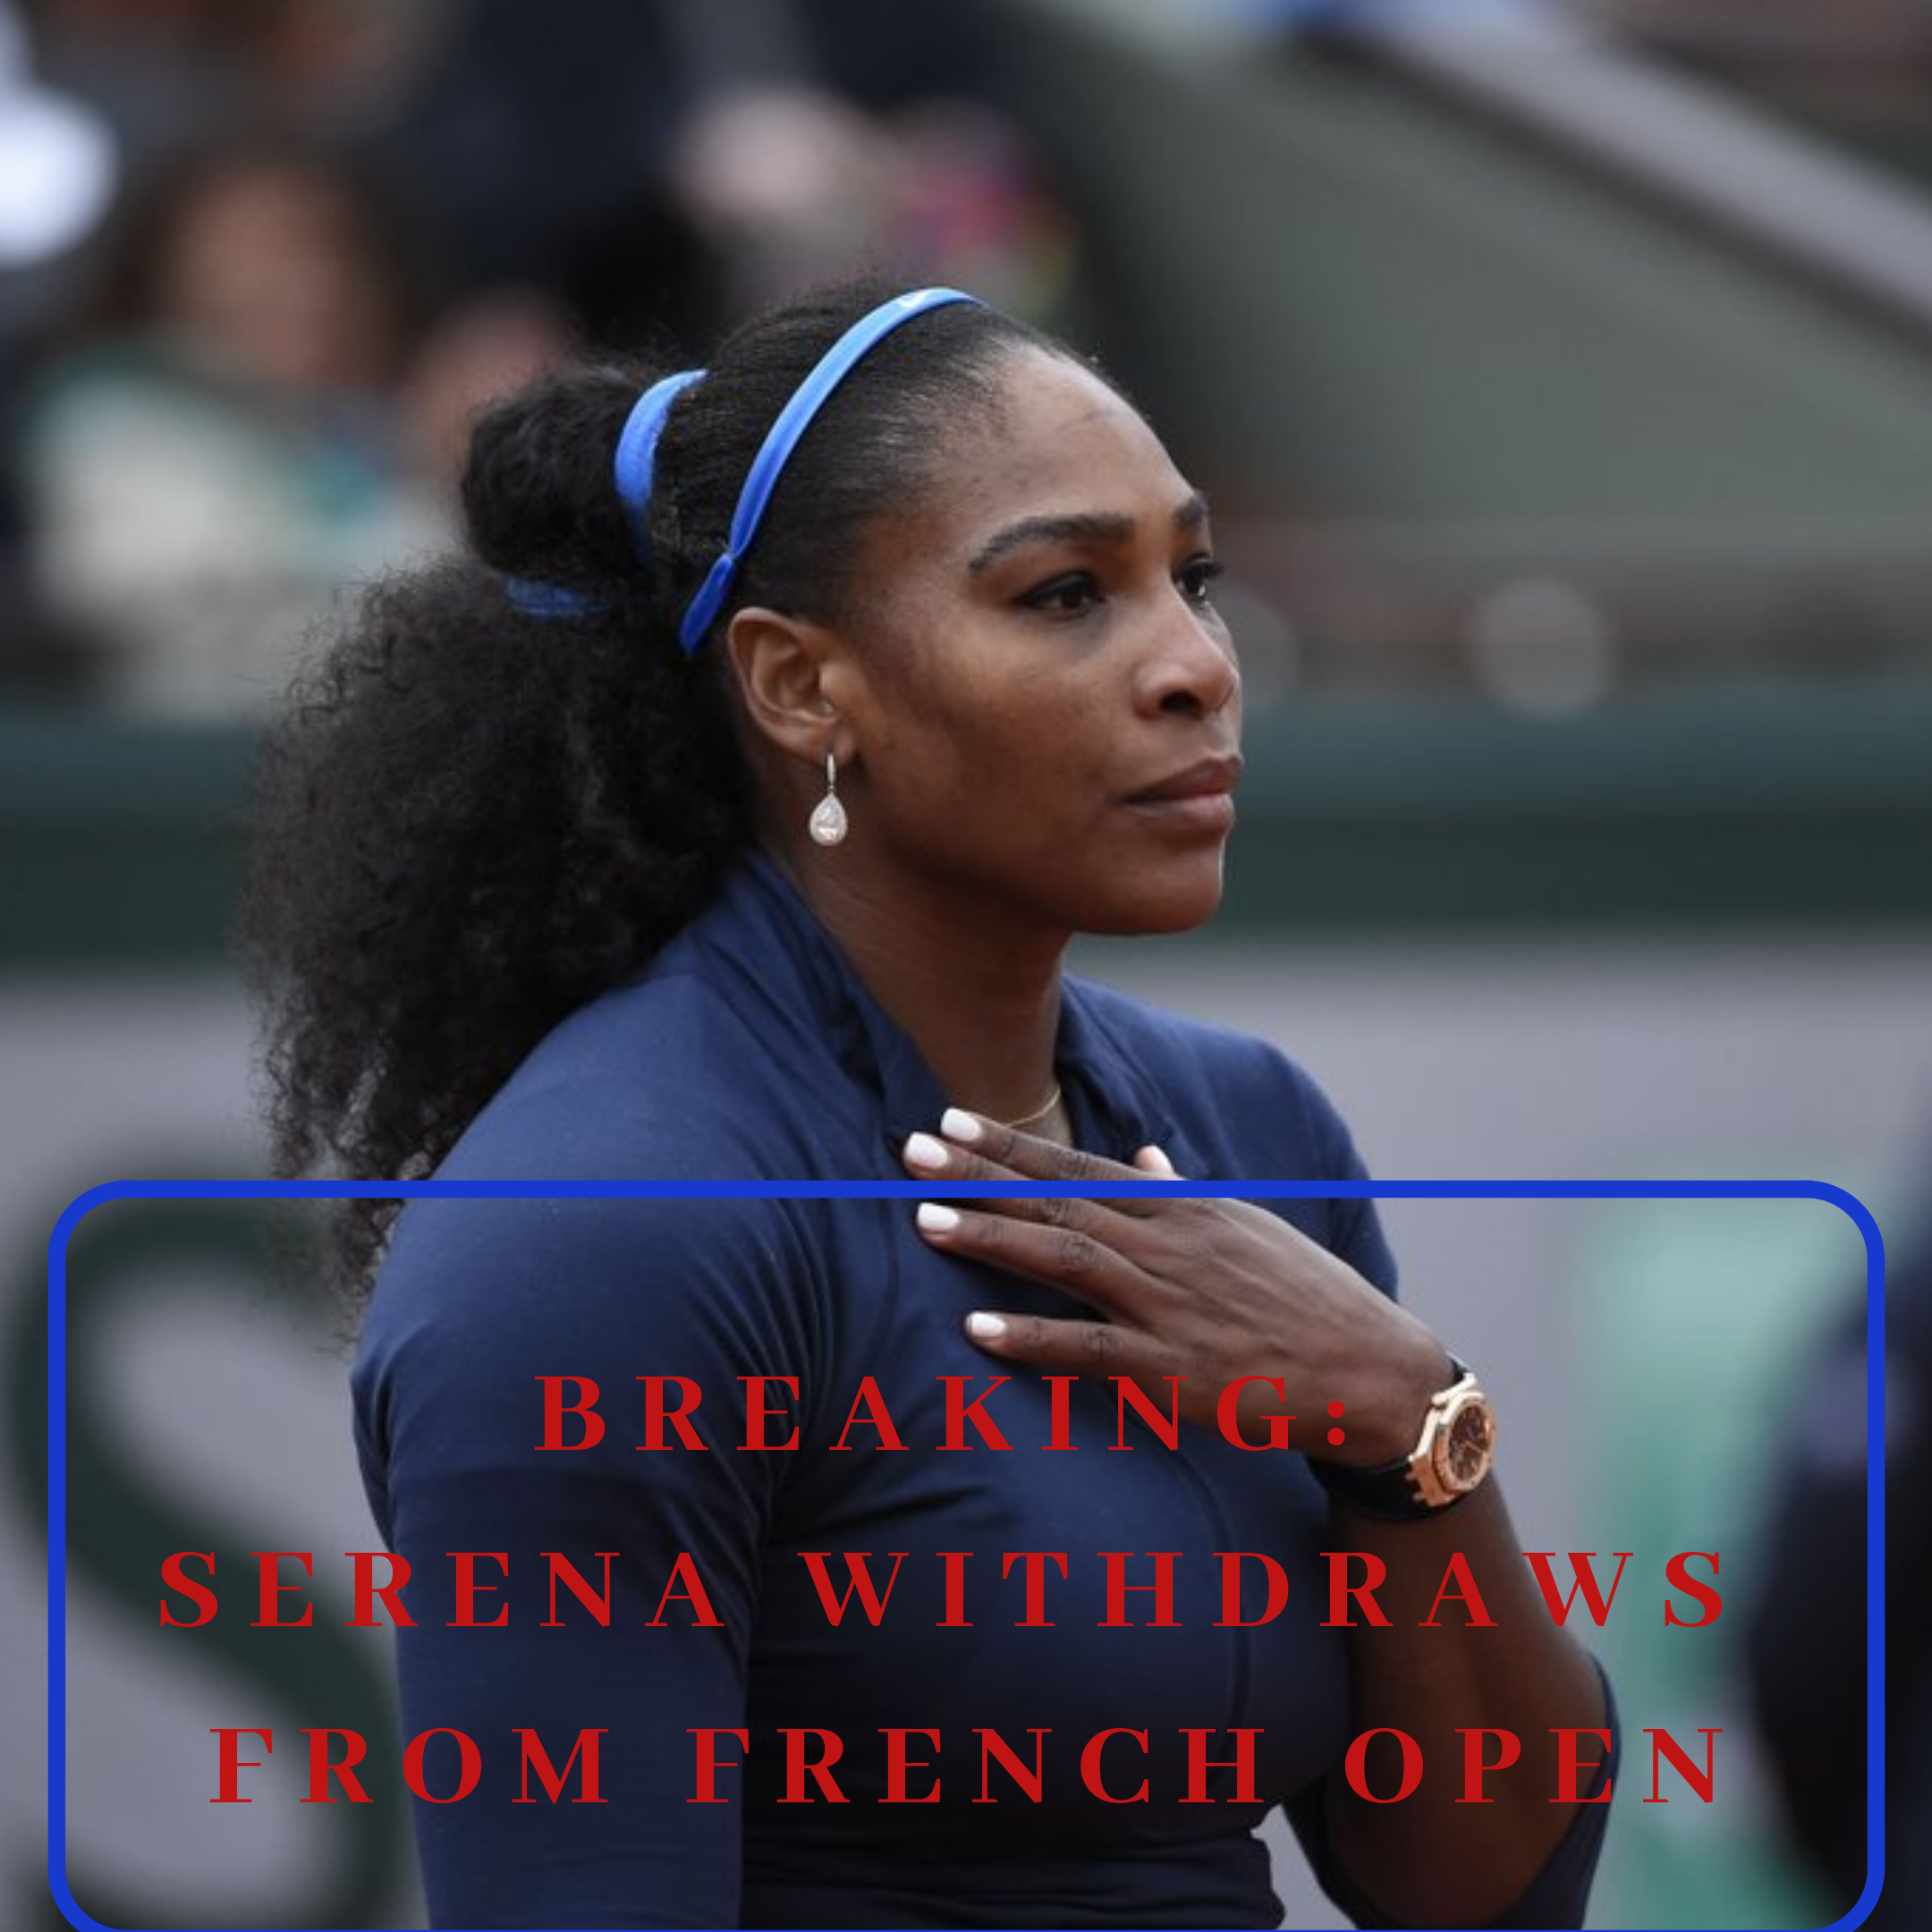 Serena Williams withdraws from French Open.